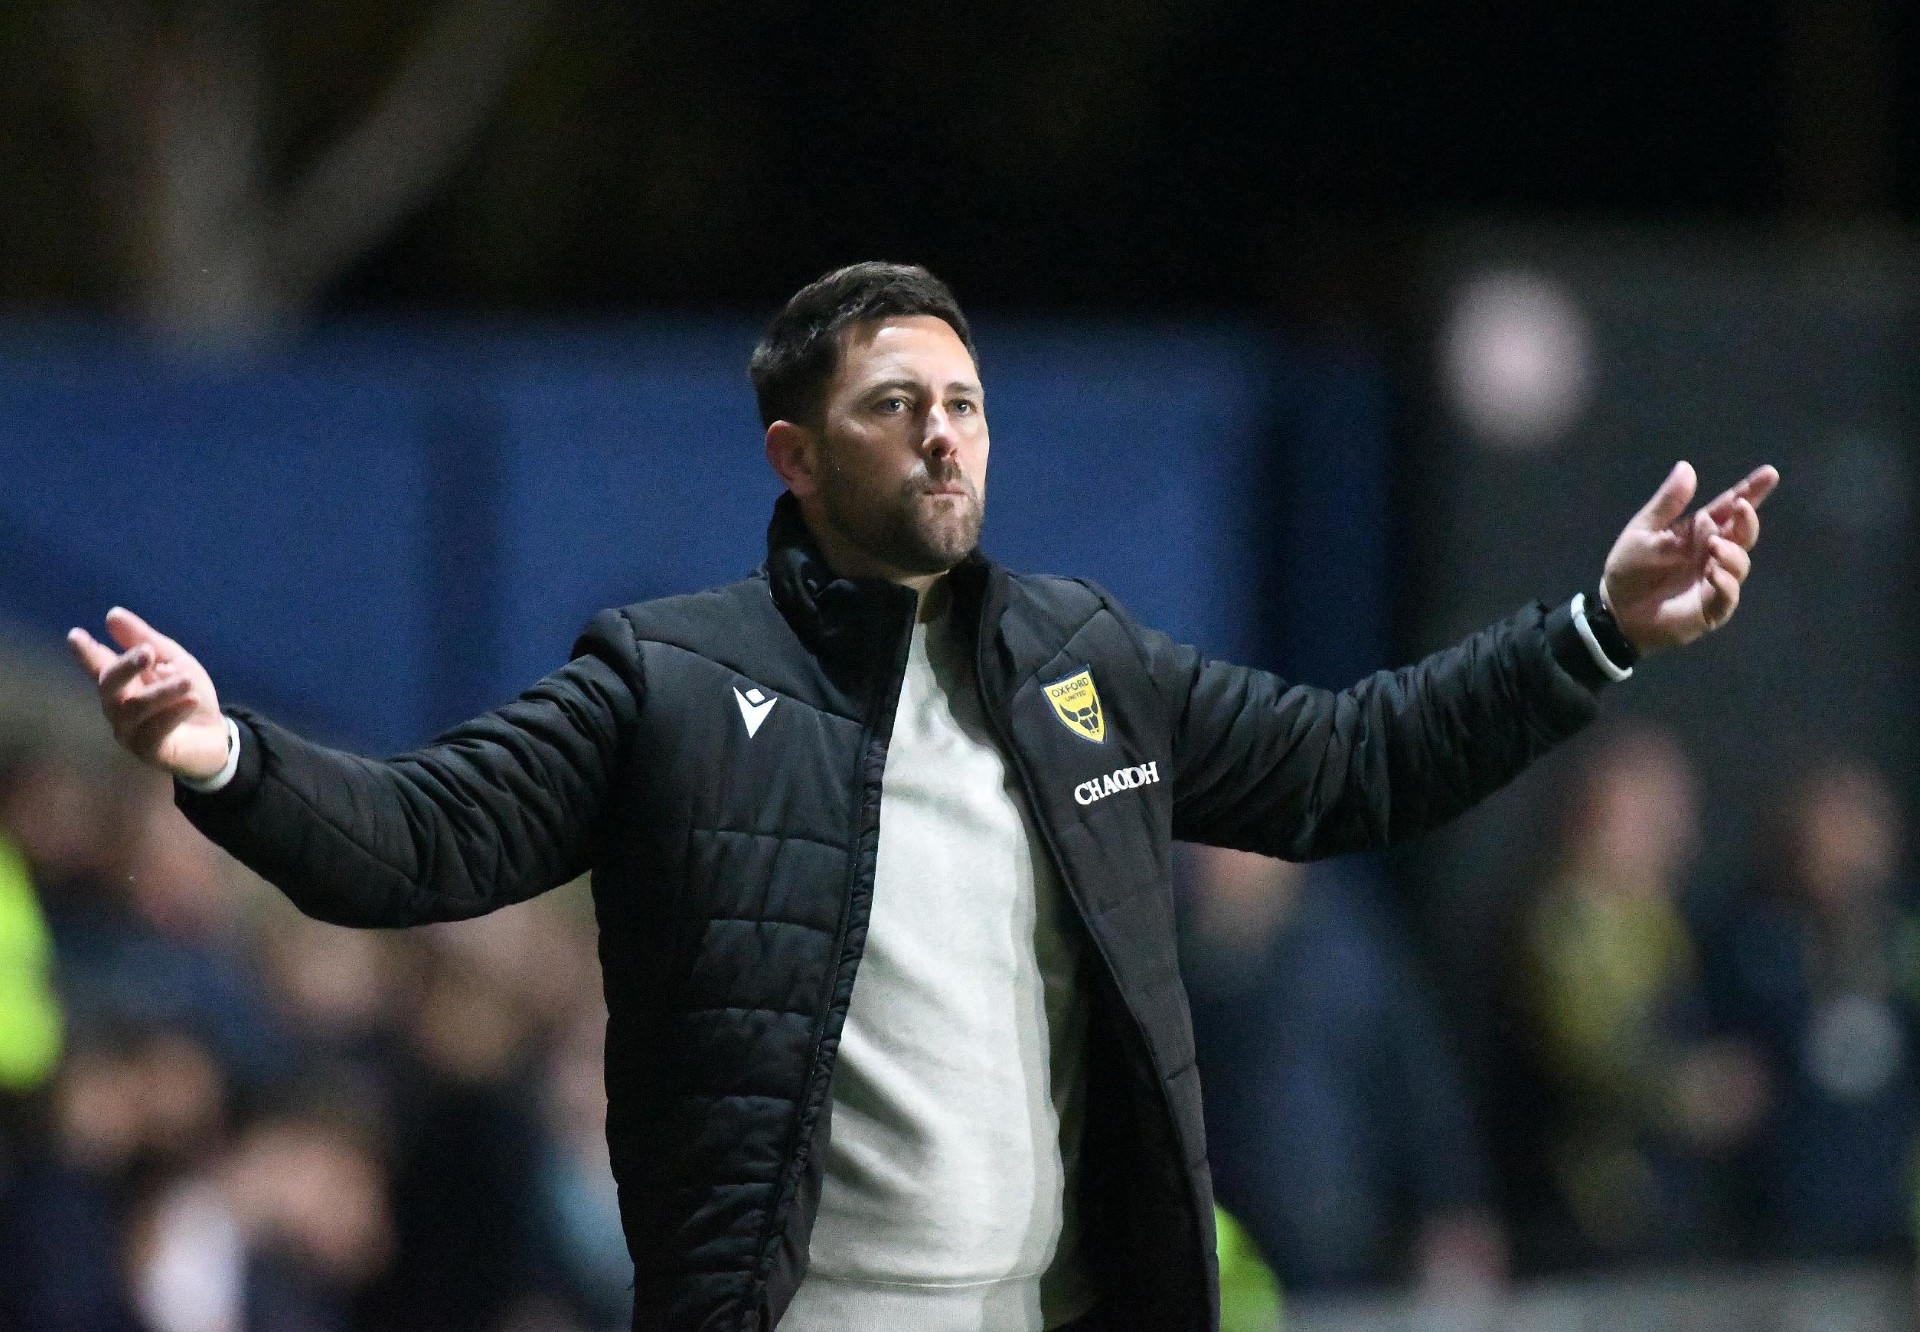 Oxford United boss on search for wingers after Josh Murphy exit